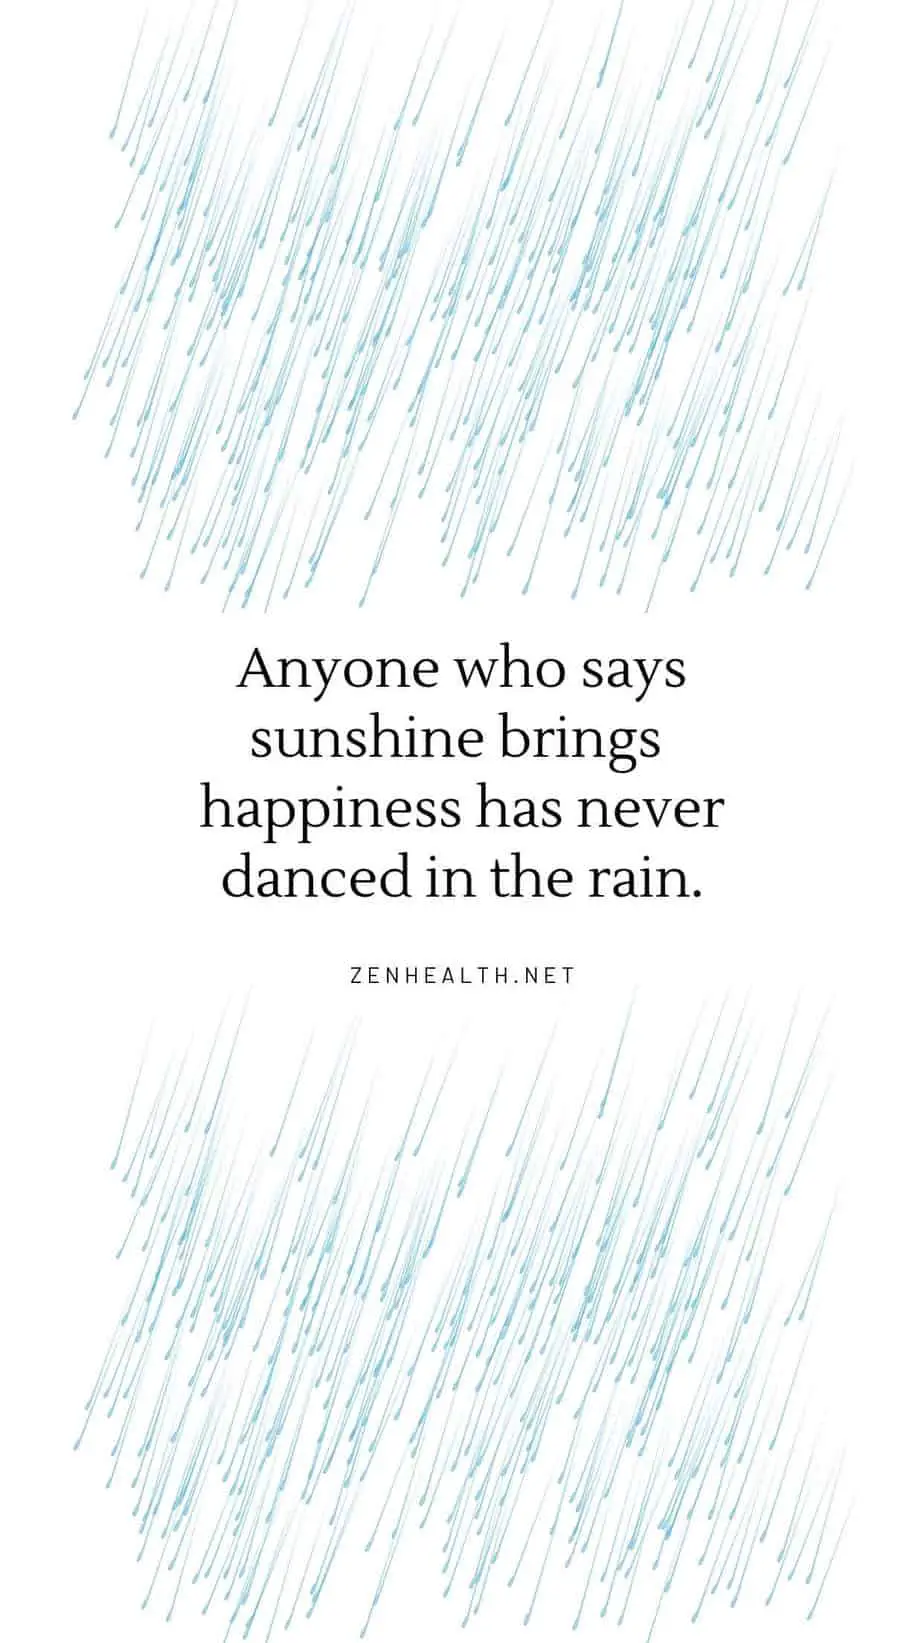 Anyone who says sunshine brings happiness has never danced in the rain.